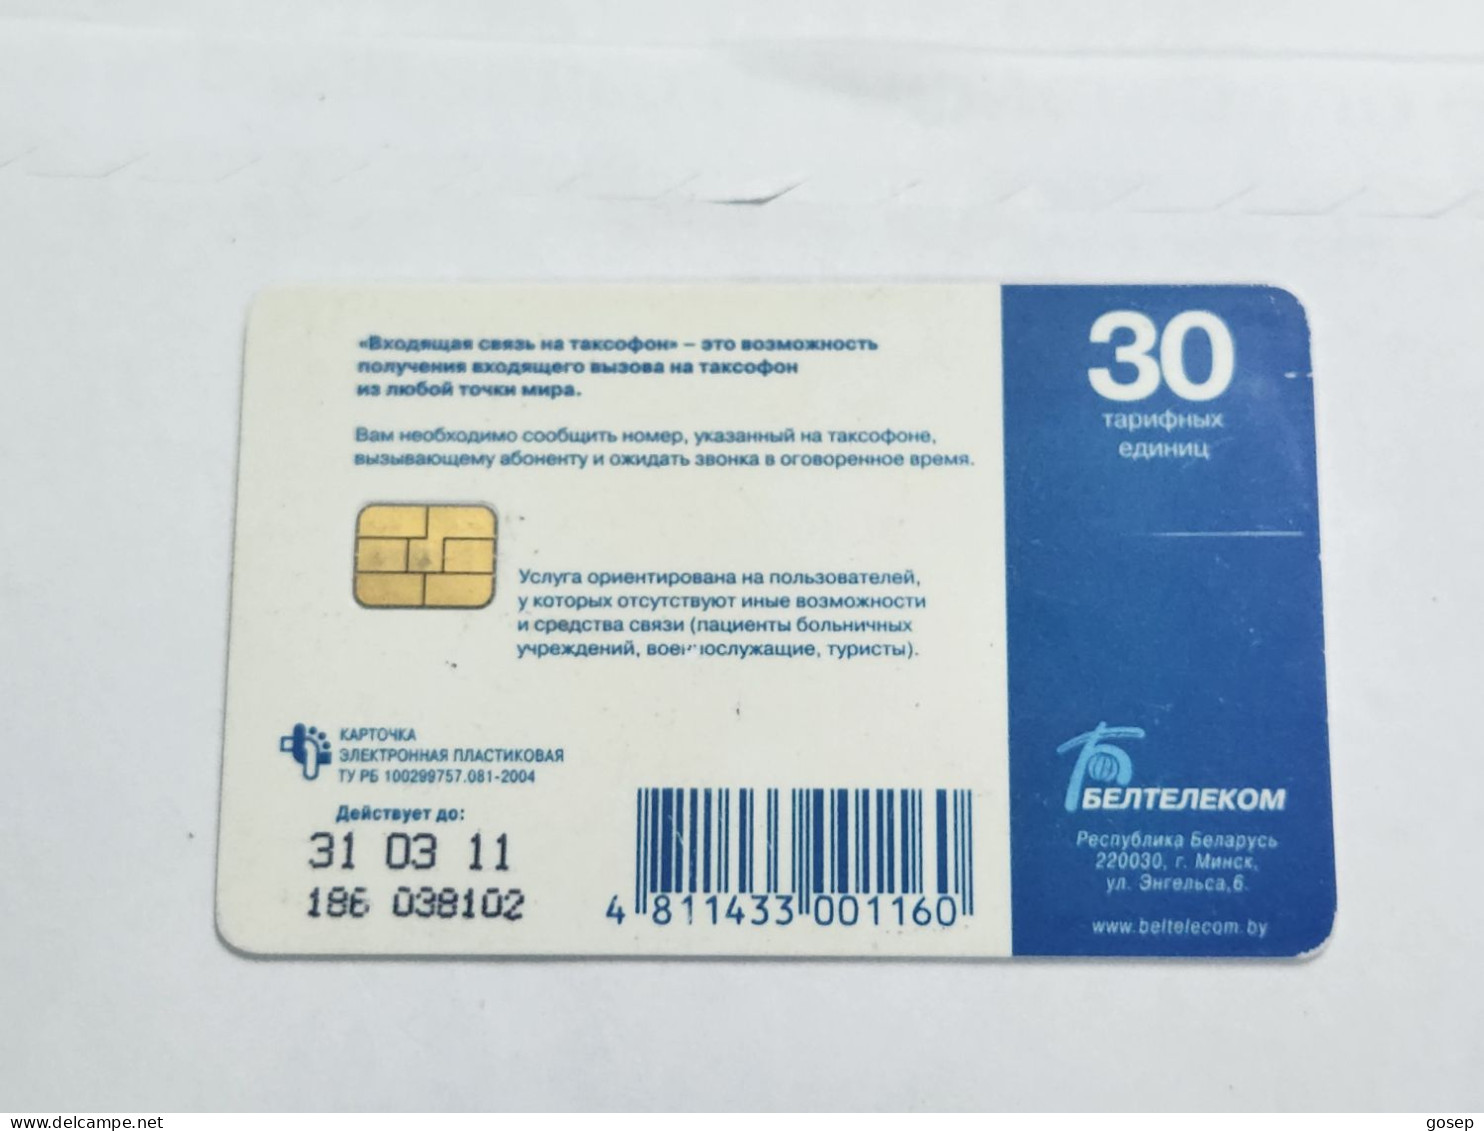 BELARUS-(BY-BLT-186)-Incoming Connection-(152)(GOLD CHIP)(038102)(tirage-80.000)-used Card+1card Prepiad Free - Belarus